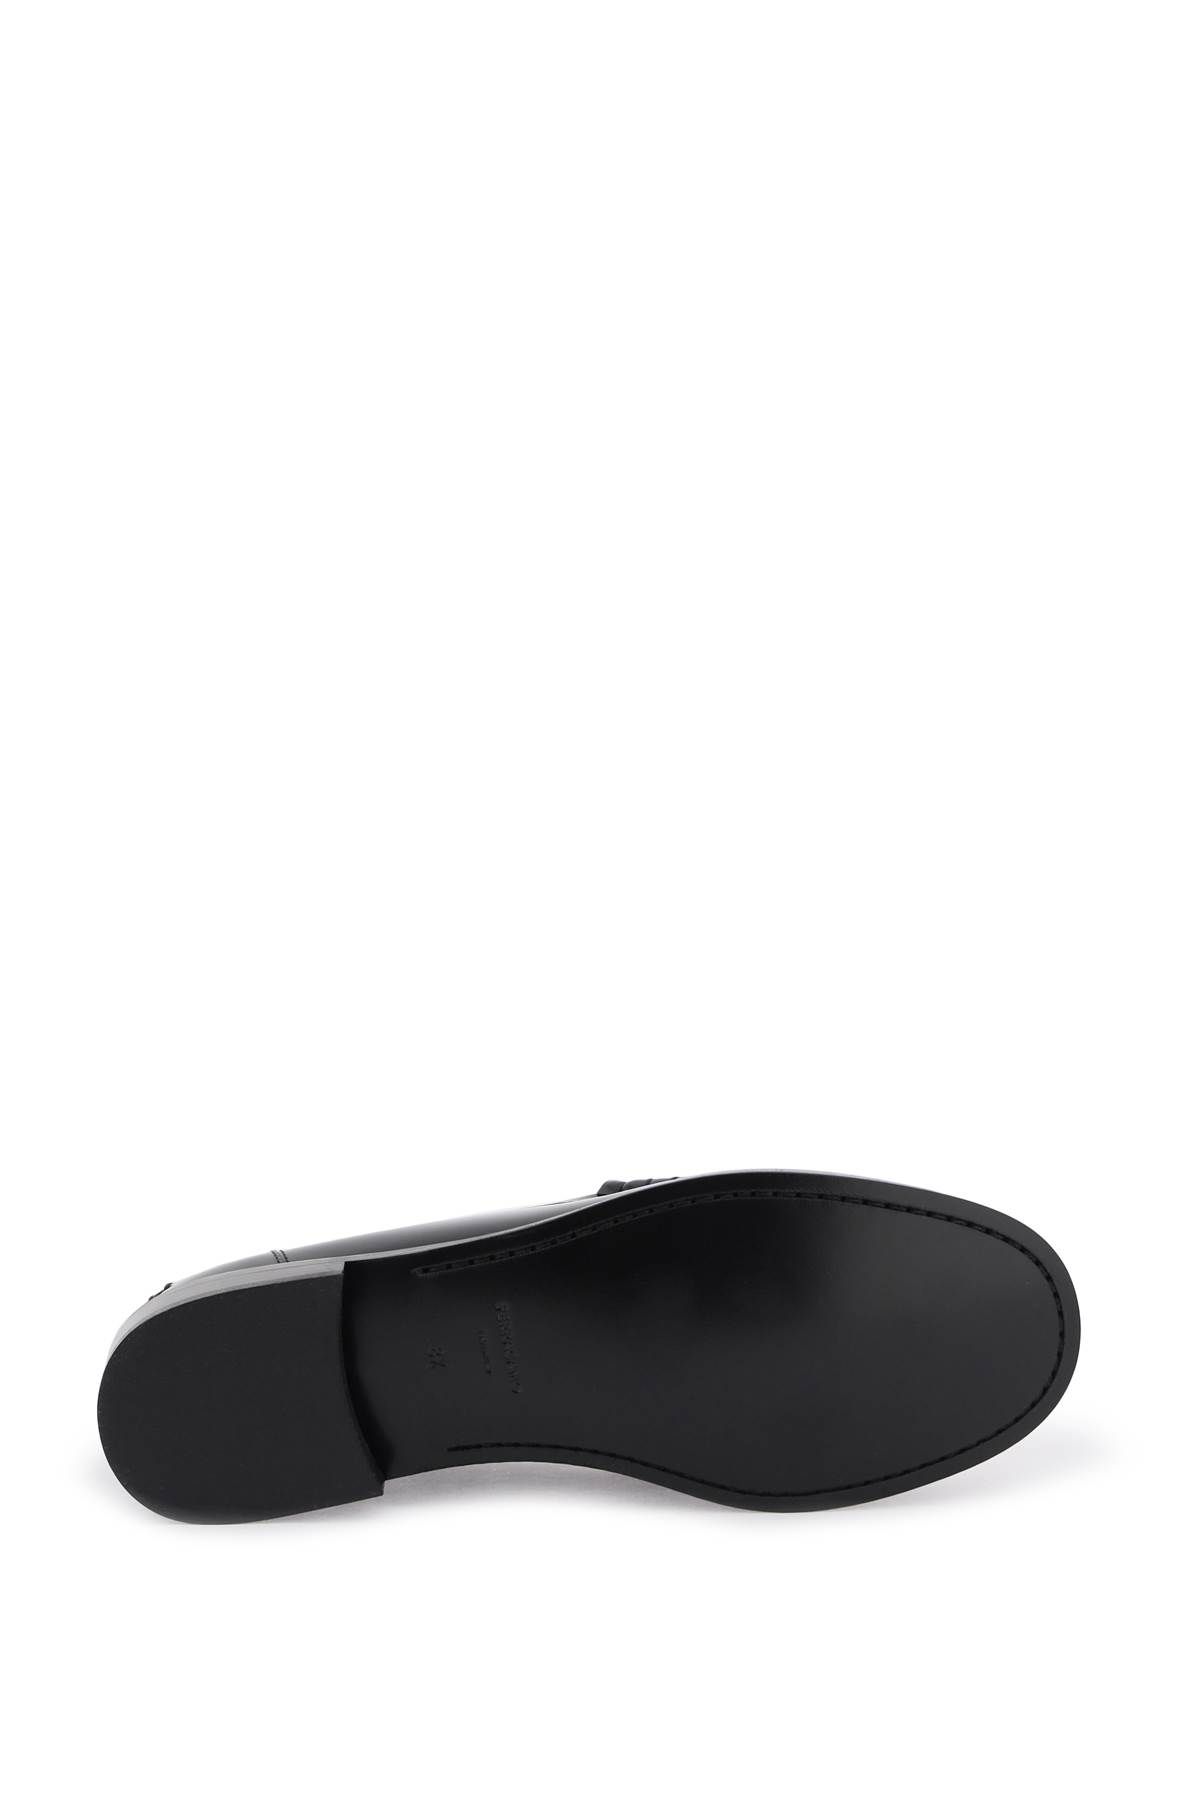 Shop Ferragamo Leather Loafers With Embossed Logo In White,black